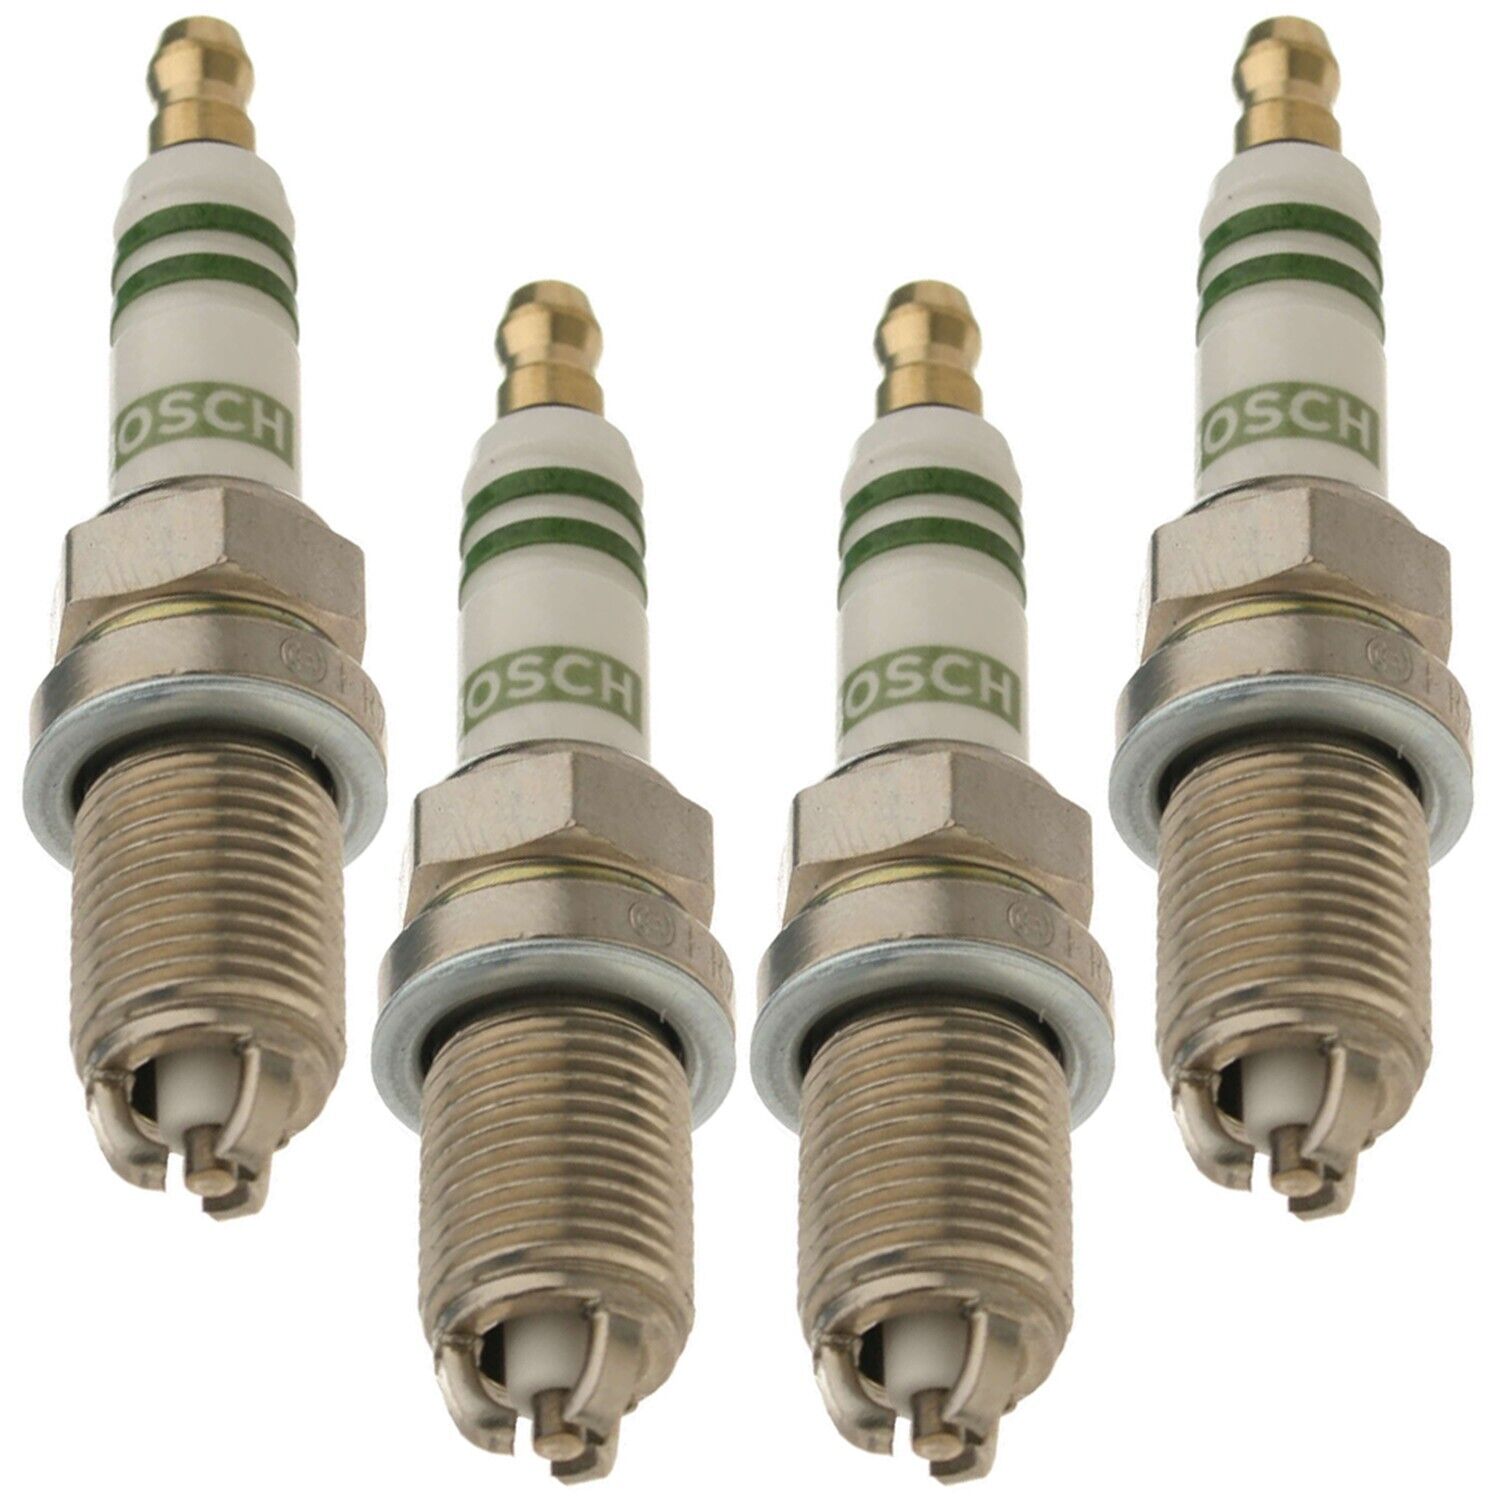 Bosch Nickel with Copper-Core Set 6 Spark Plug 7407 for MB W202 R170 C230 SLK230